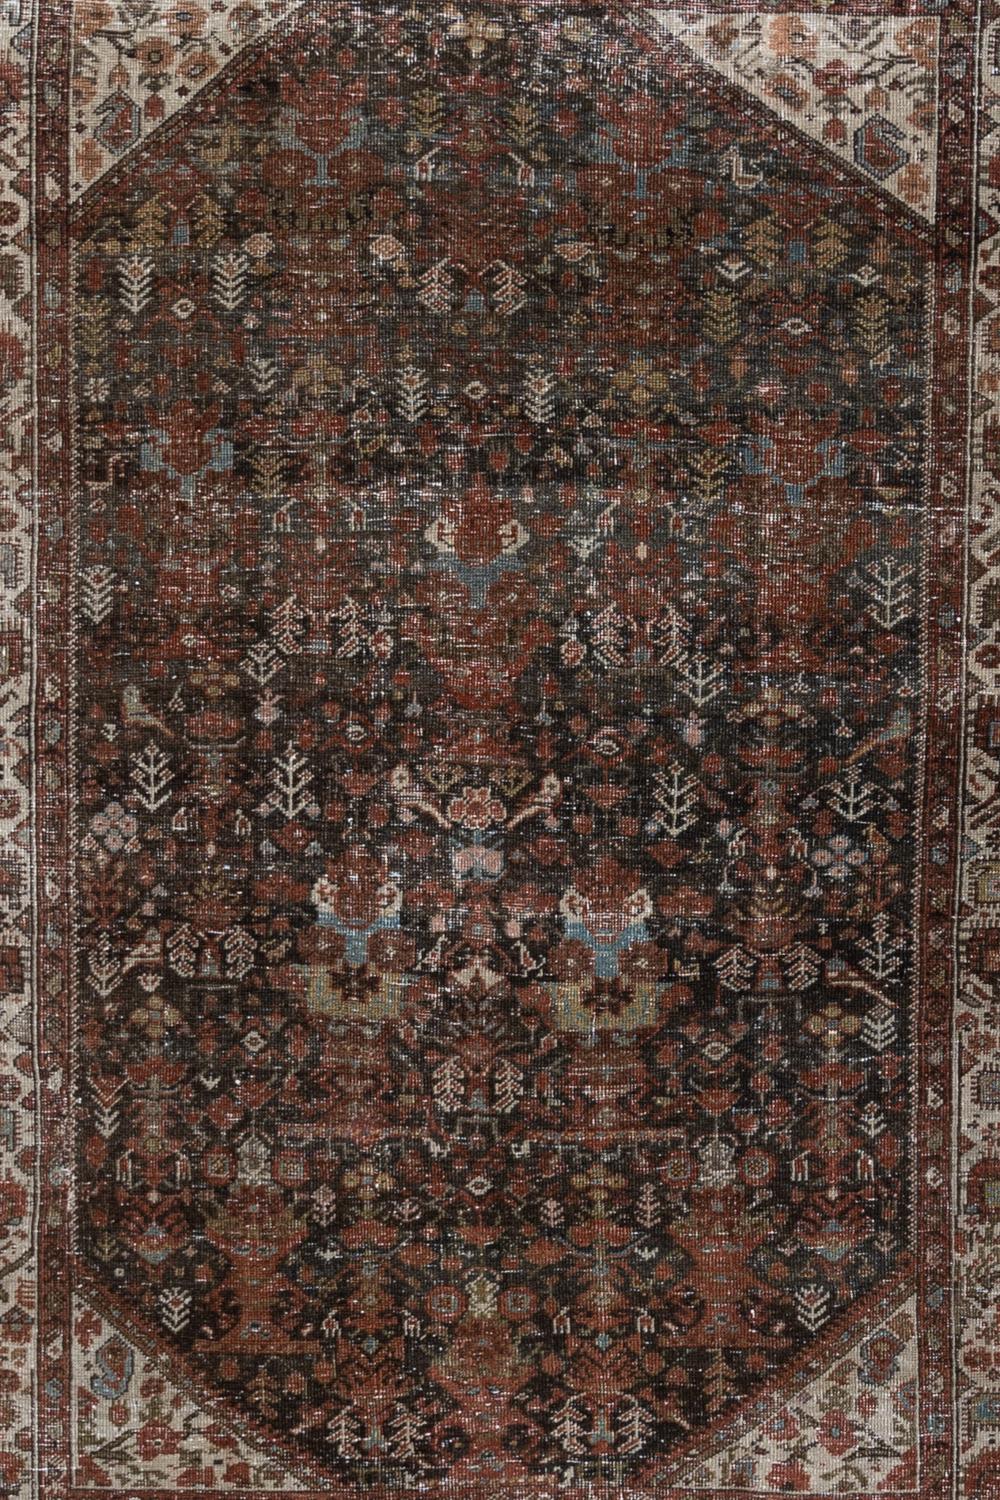 Age: late 19th century

Pile: Low

Wear Notes: 3

Material: Wool on Cotton

Vintage rugs are made by hand over the course of months, sometimes years. Their imperfections and wear are evidence of the hard working human hands that made them